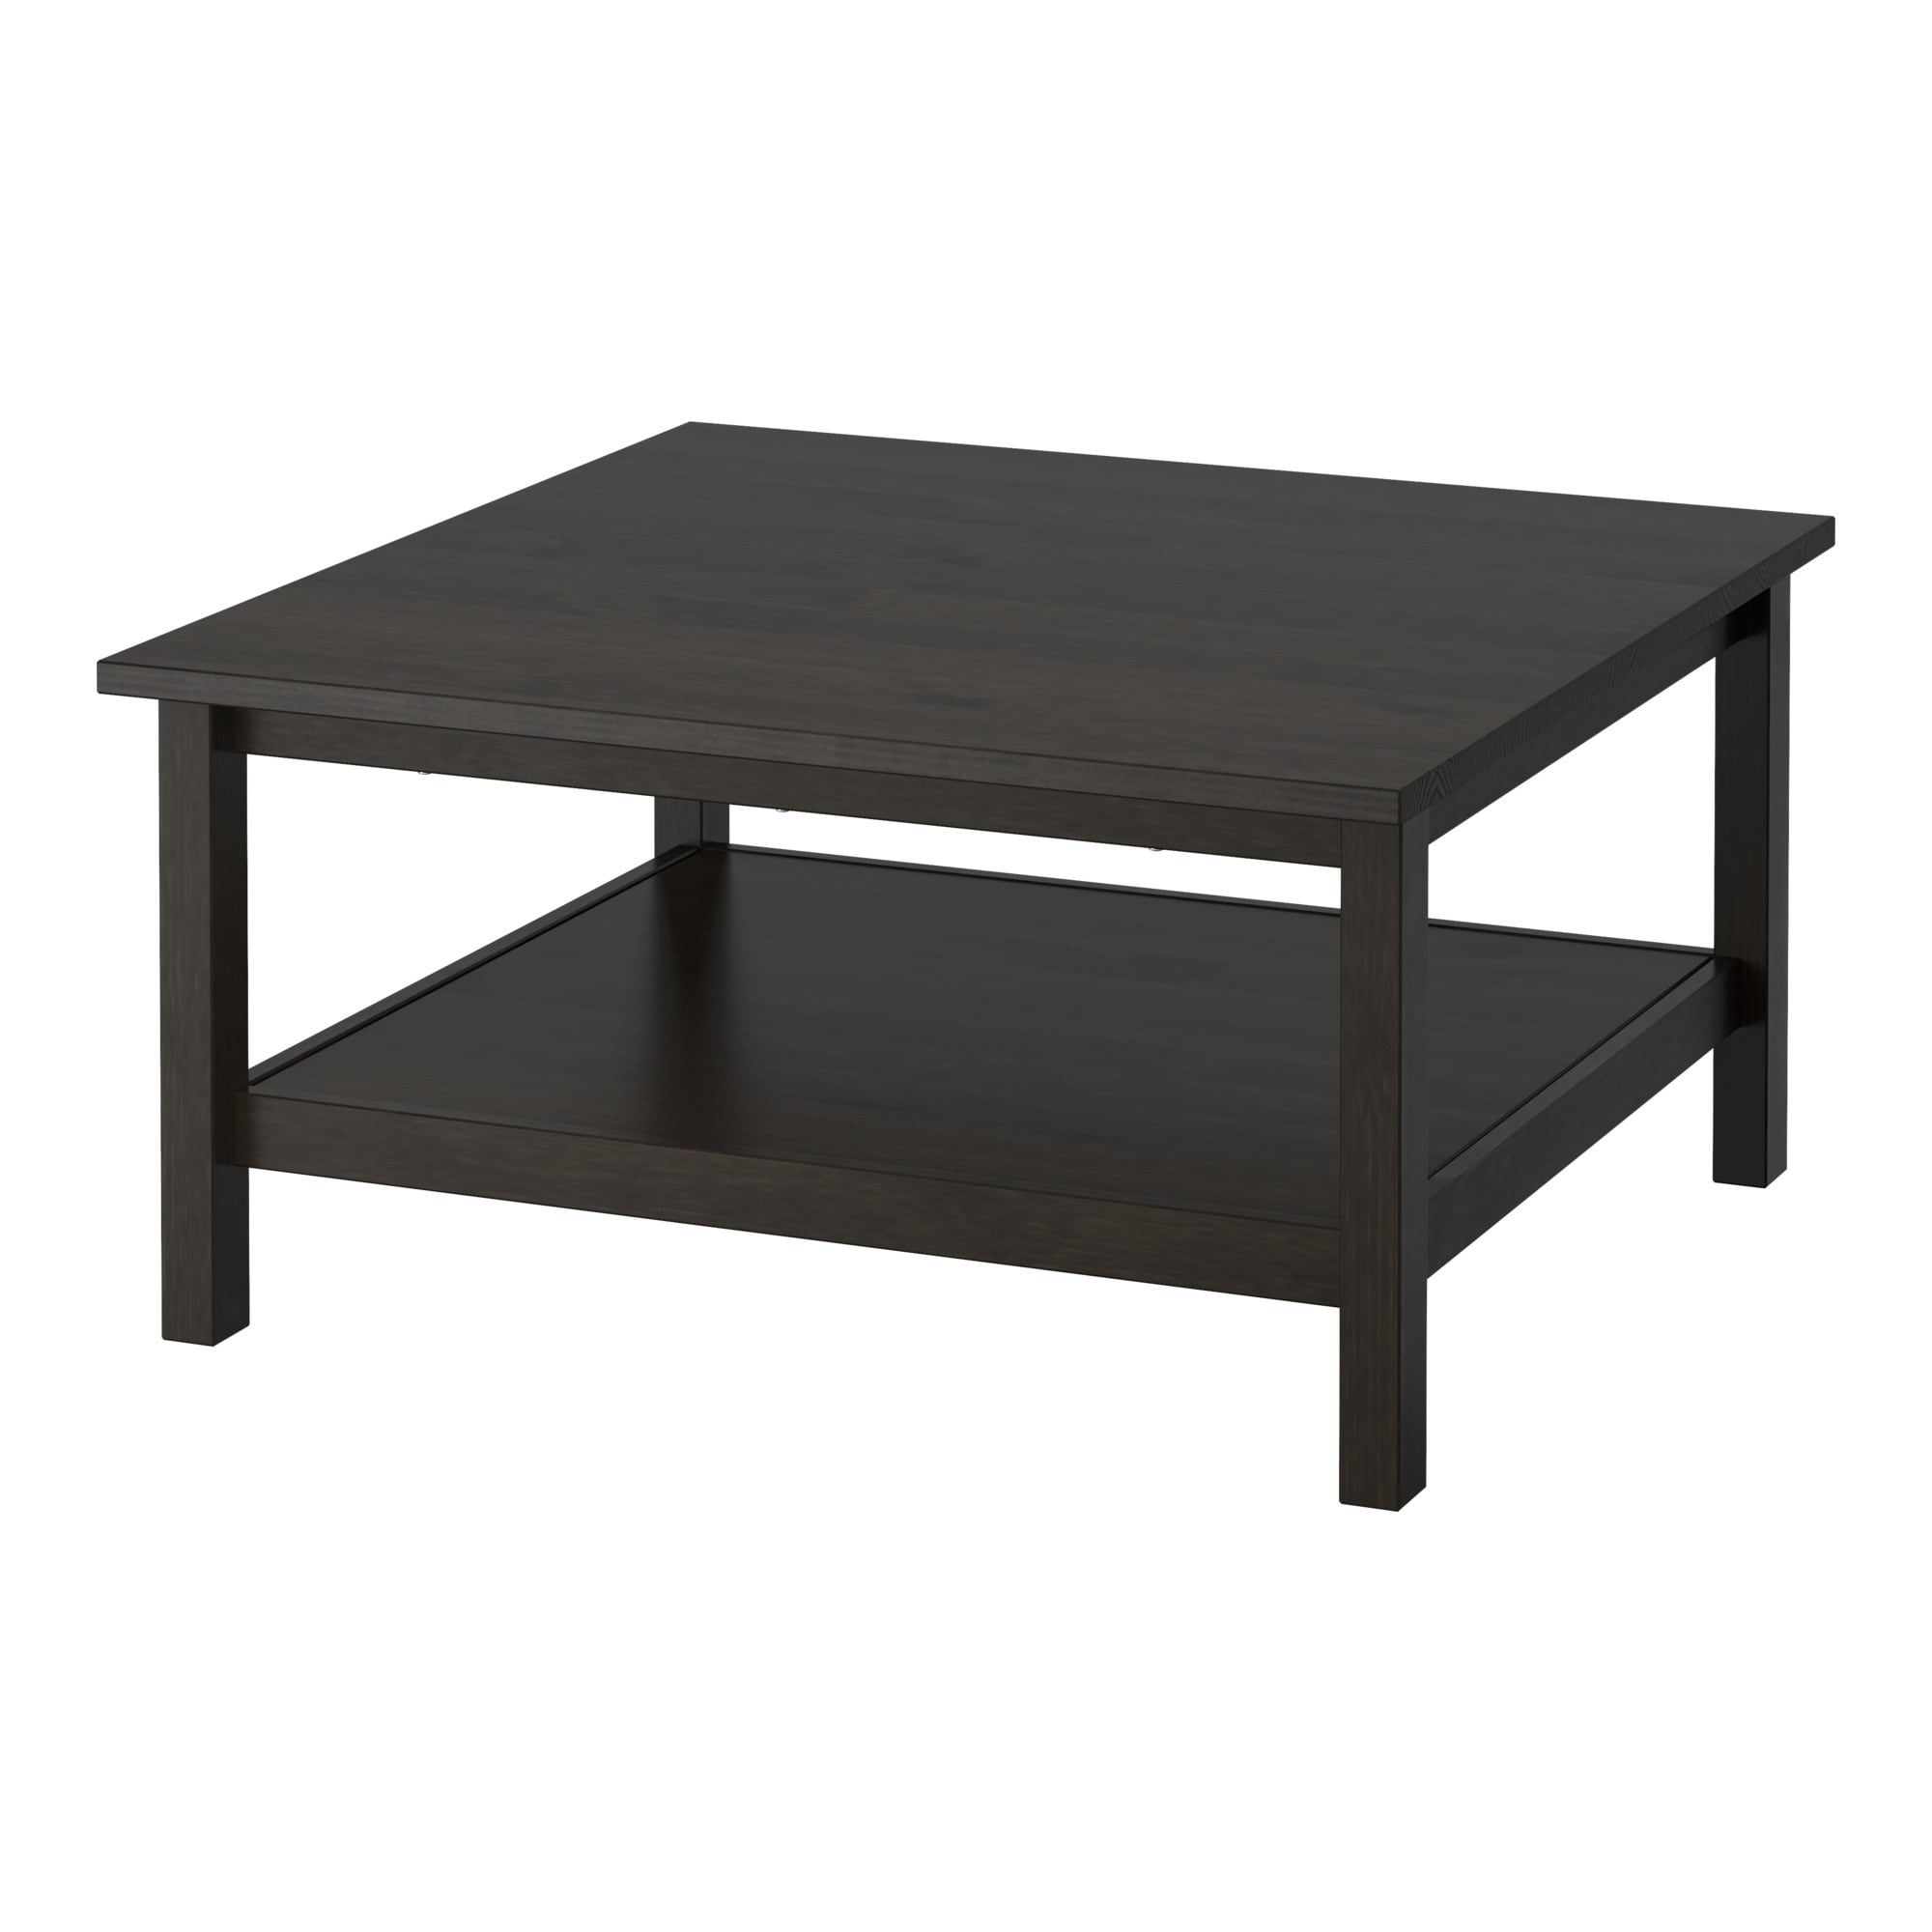 Hemnes Coffee Table – Black Brown – Ikea Inside Go Cart White Rolling Coffee Tables (View 10 of 30)